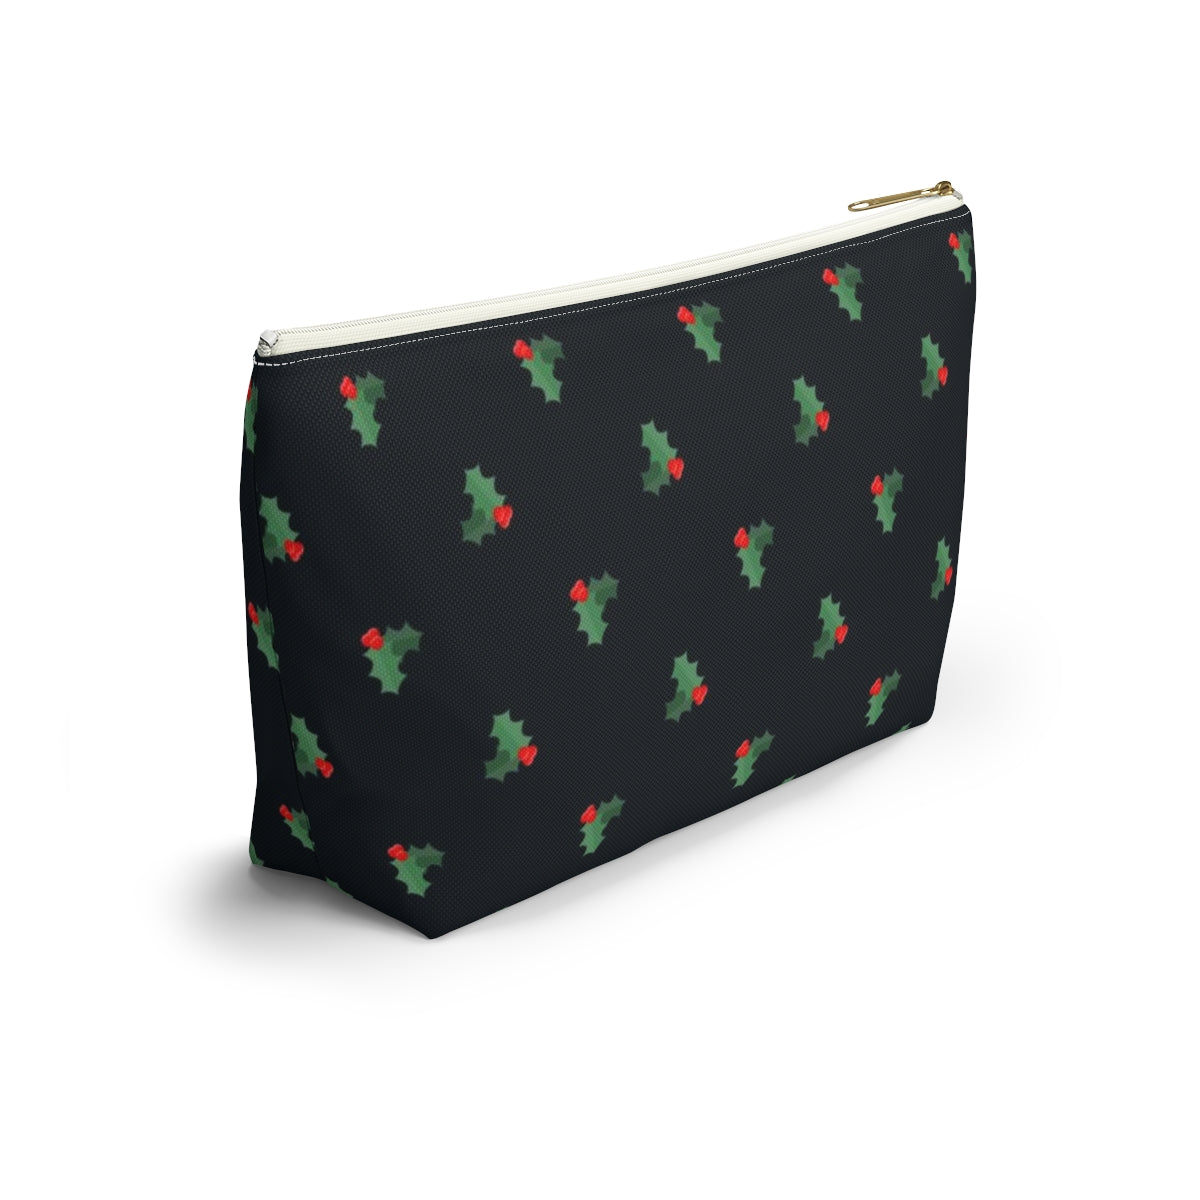 Big Bottom Zipper Pouch - Holly Leaves & Berries